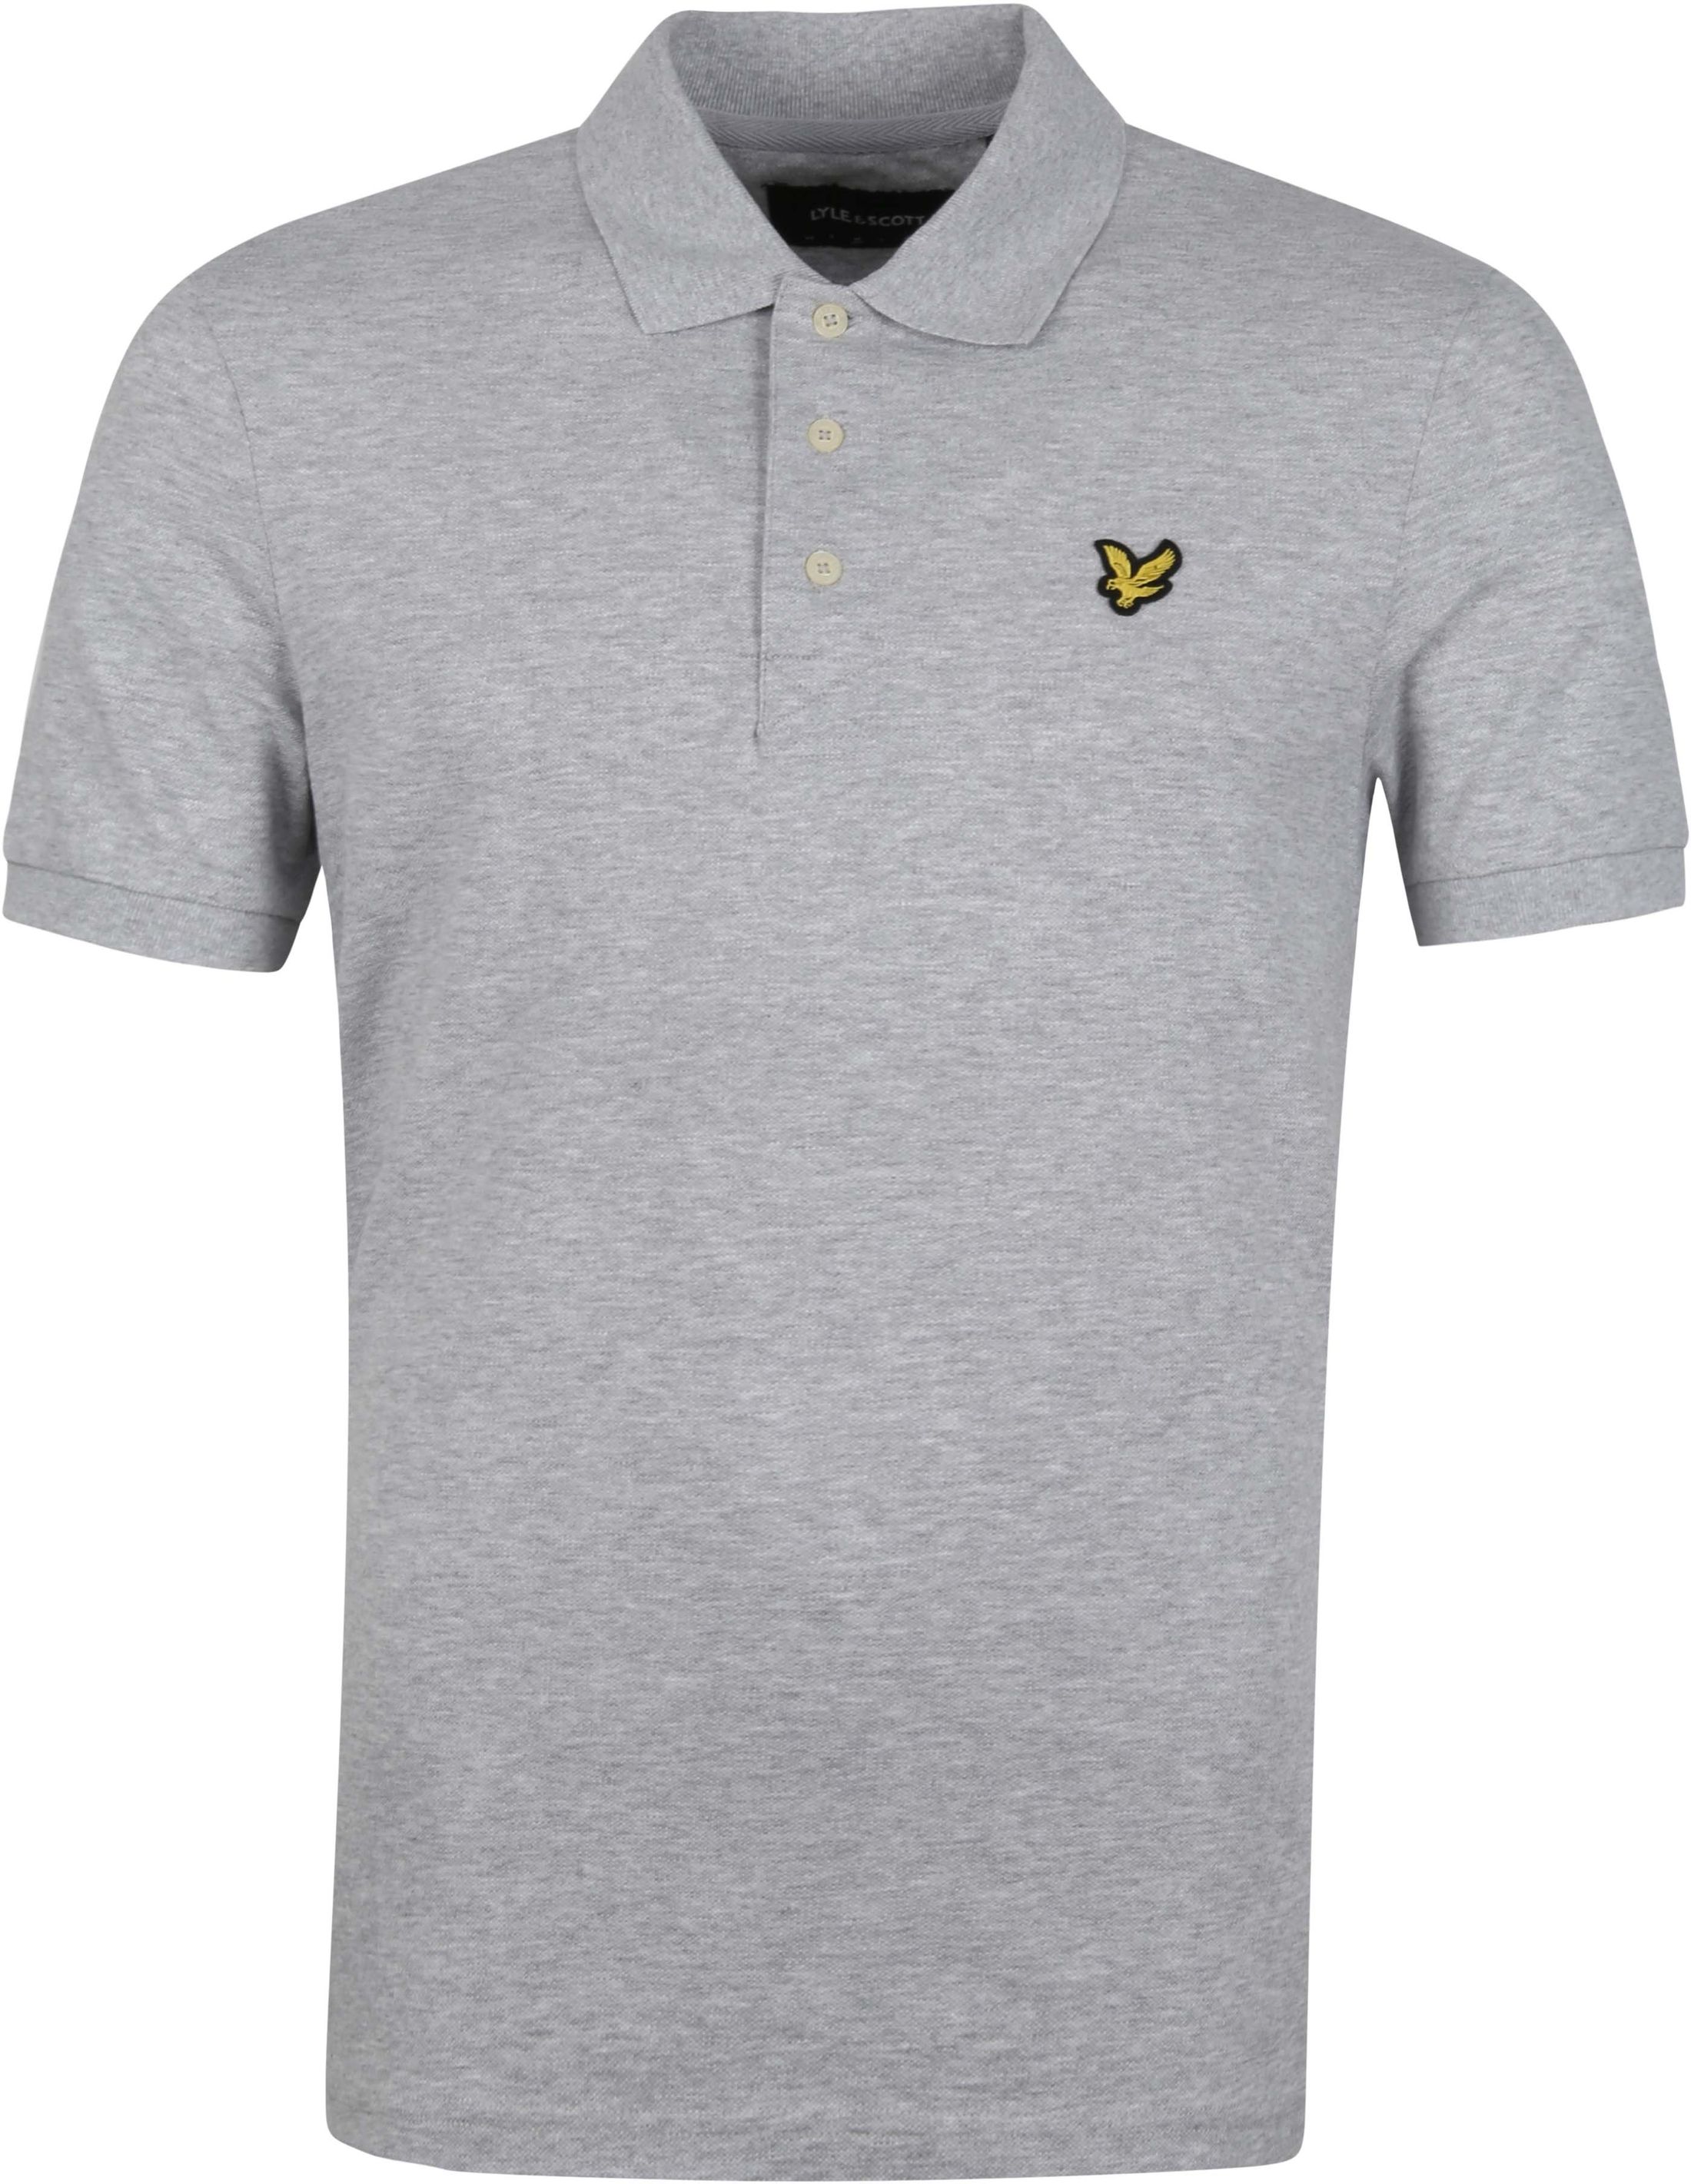 Lyle and Scott Polo Grey size M